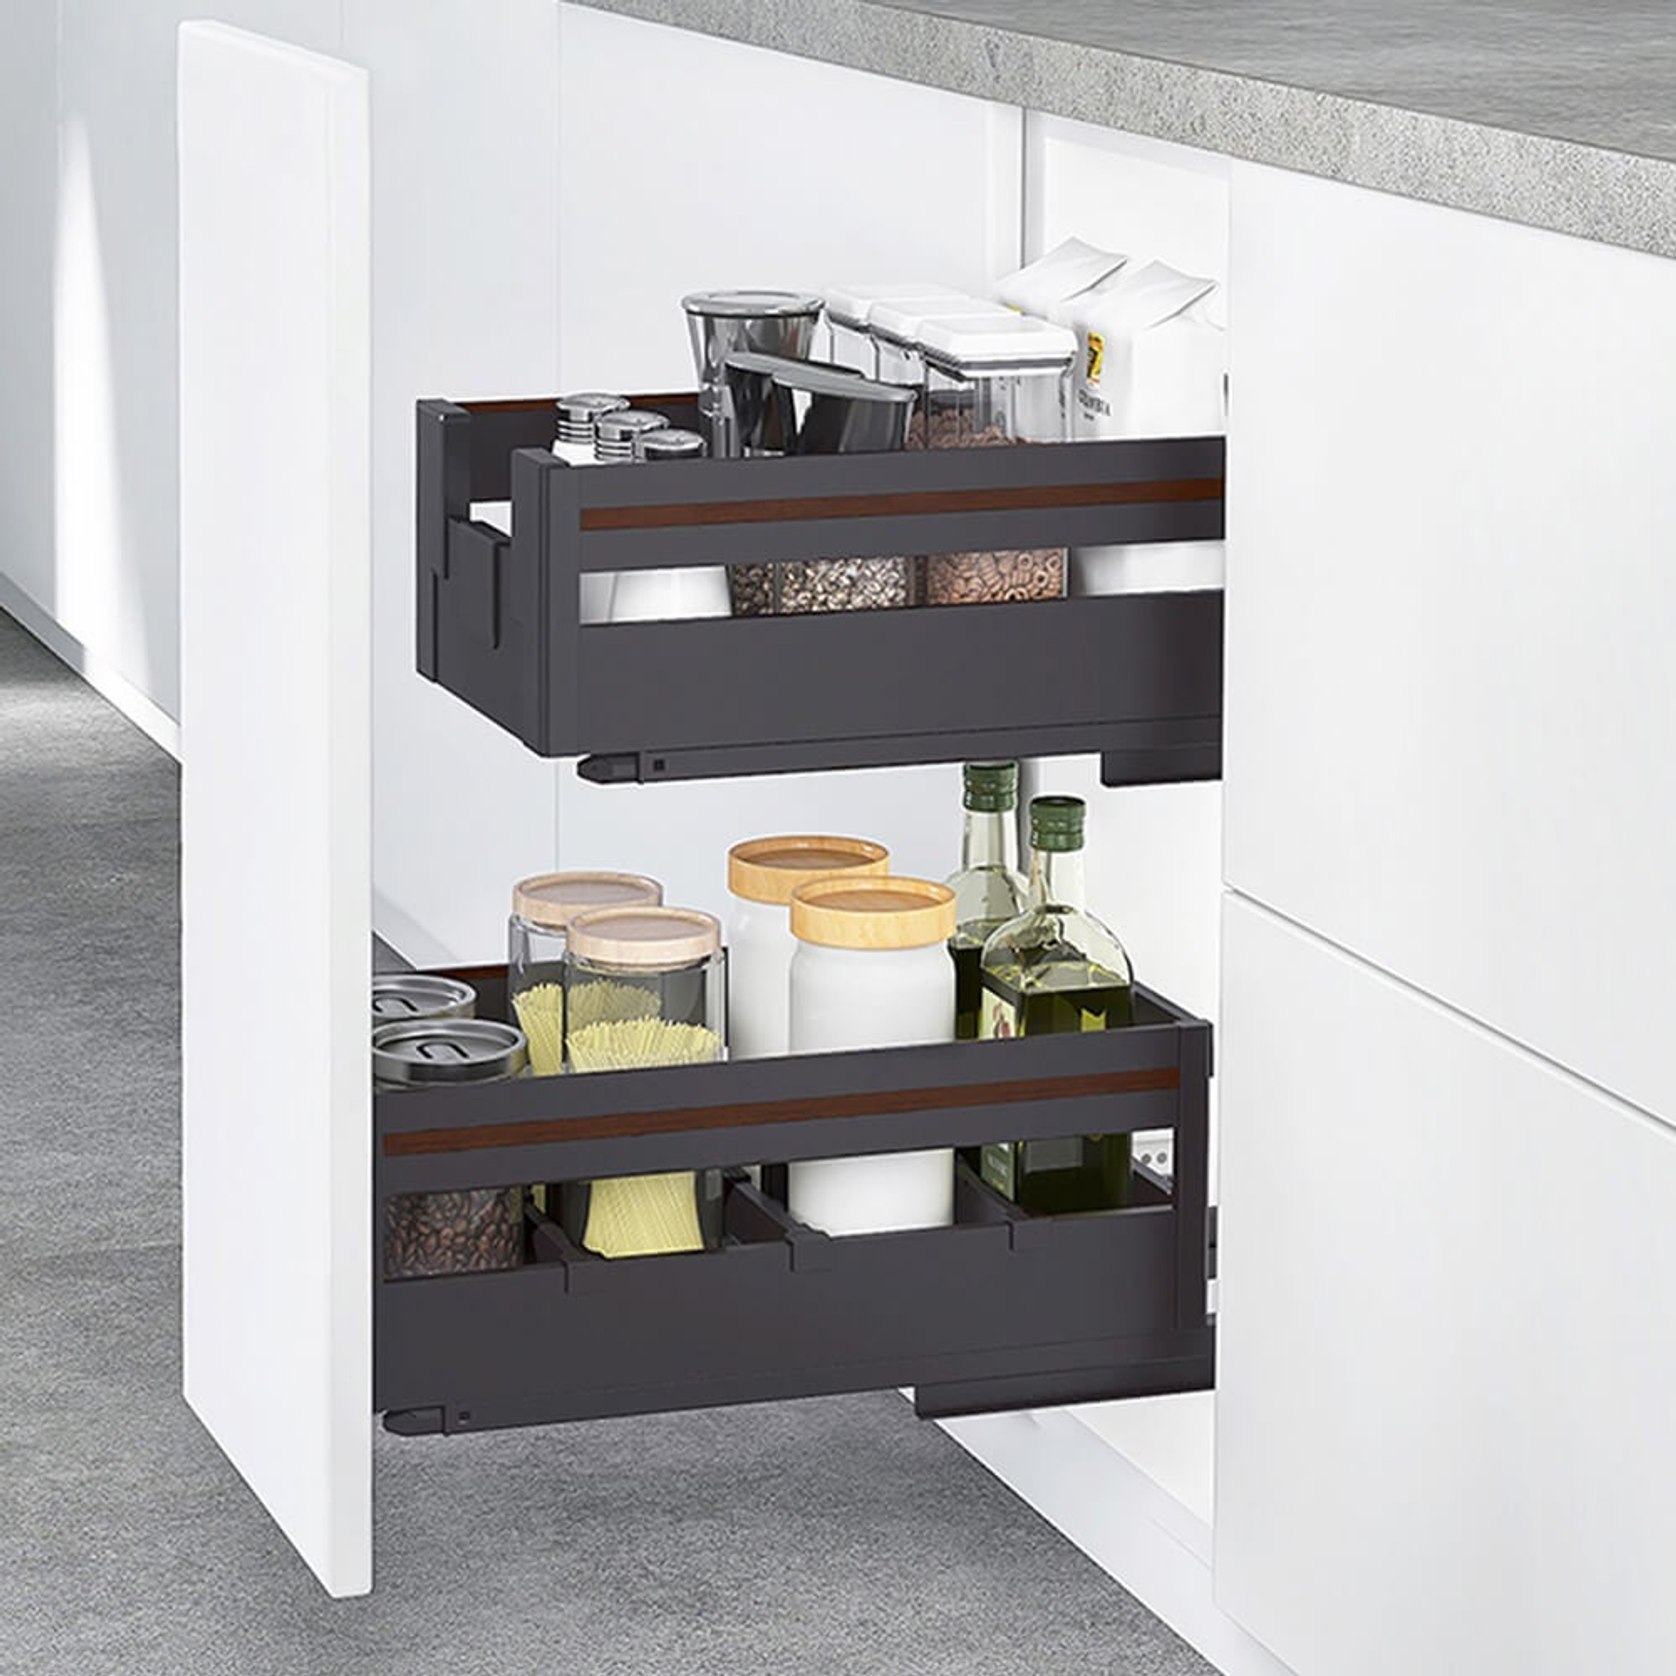 ELITE Galley Kitchen Pull-Out Cupboard Organiser - Suits 400mm Cabinet